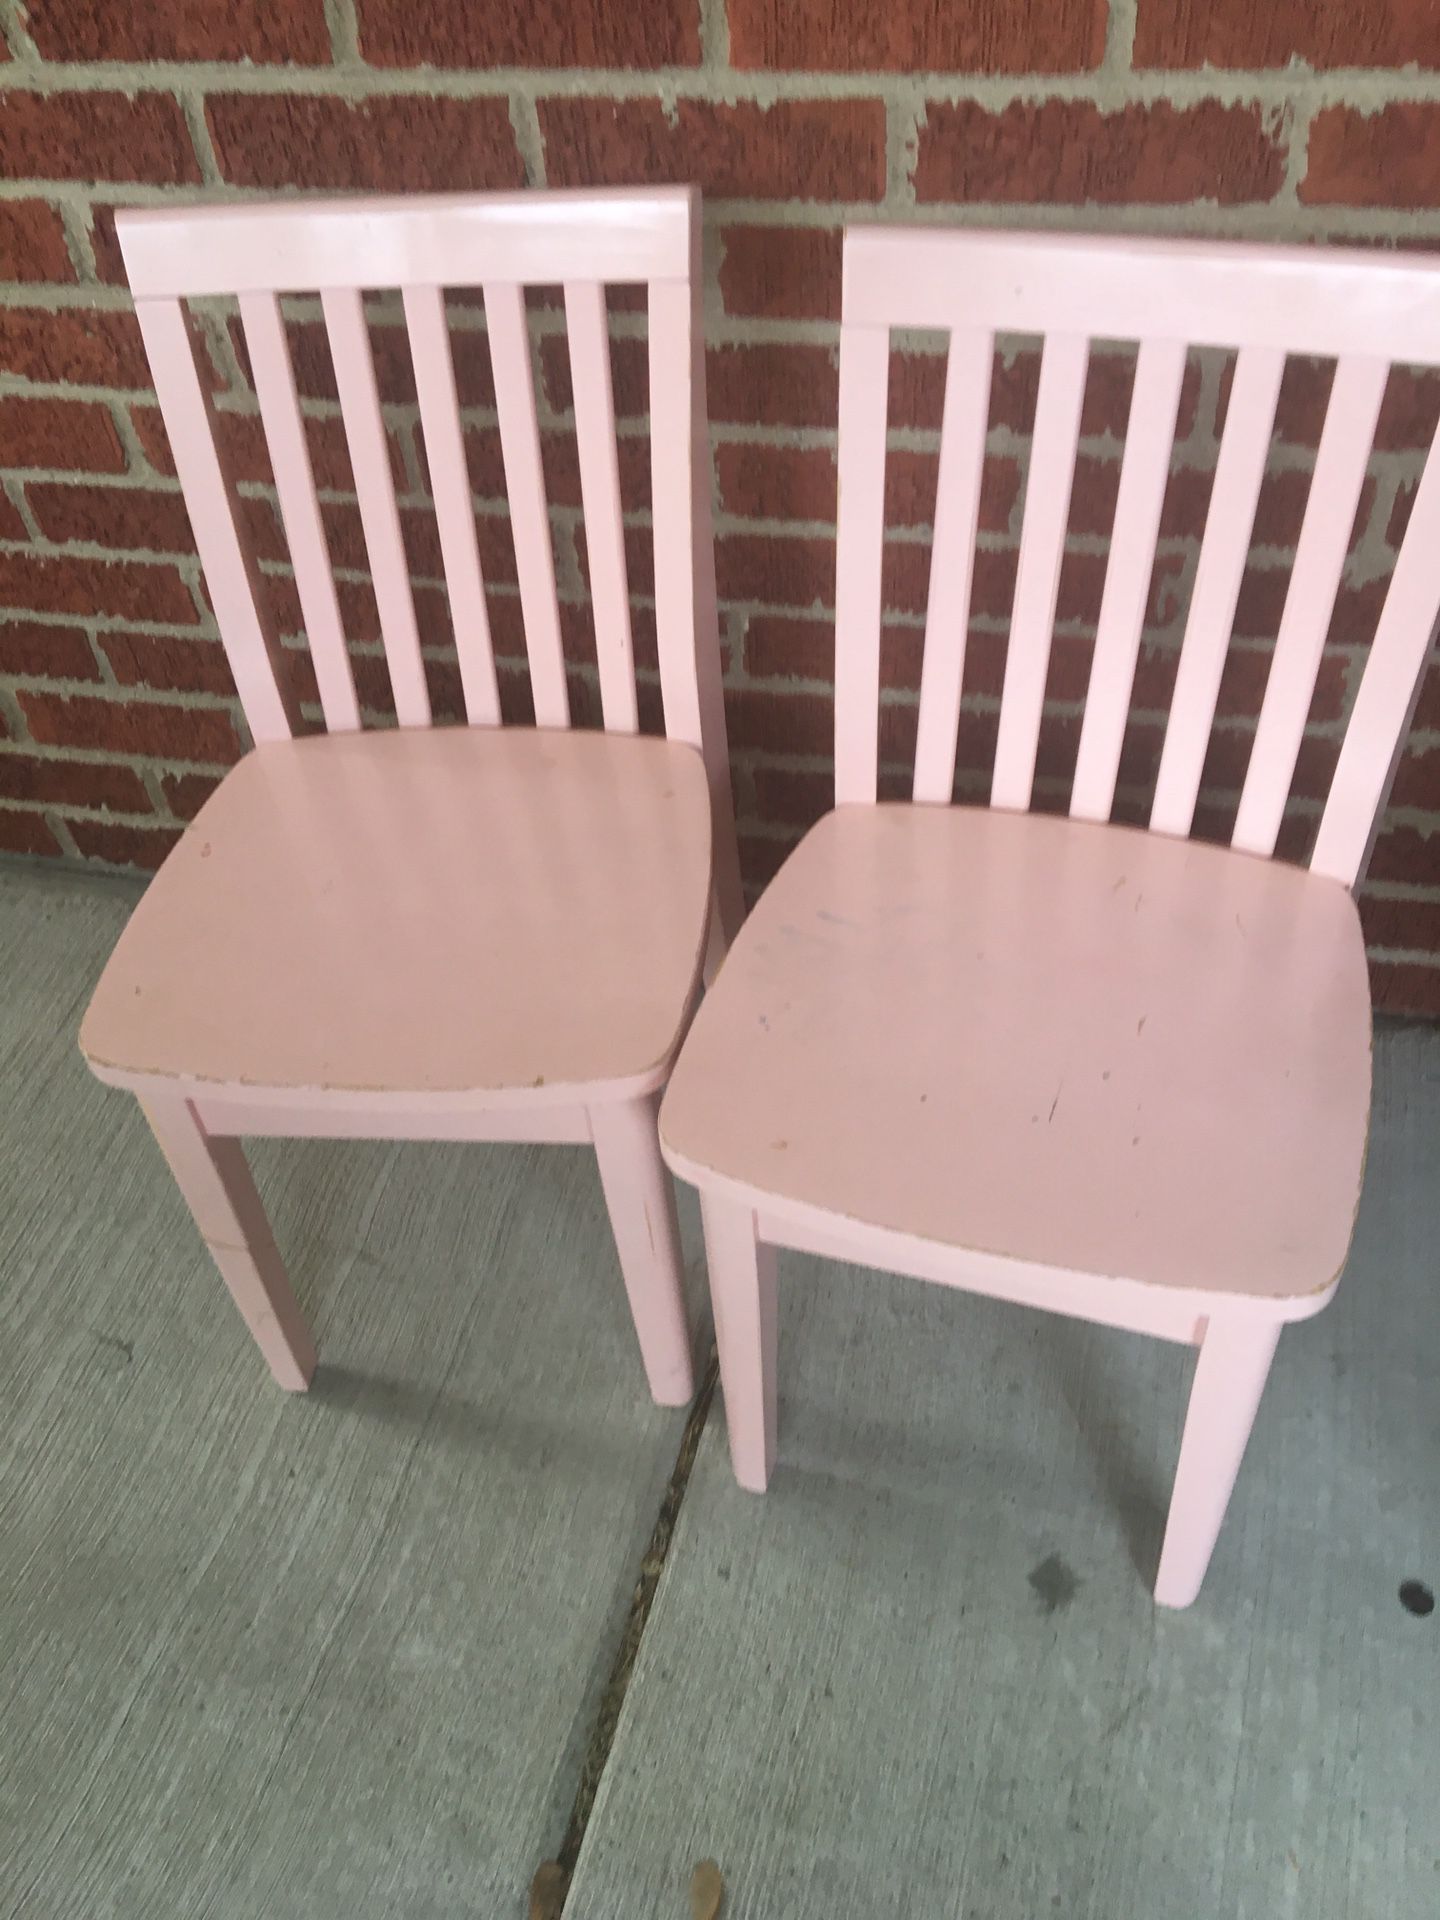 2 wooden pink kids chairs $10 for both